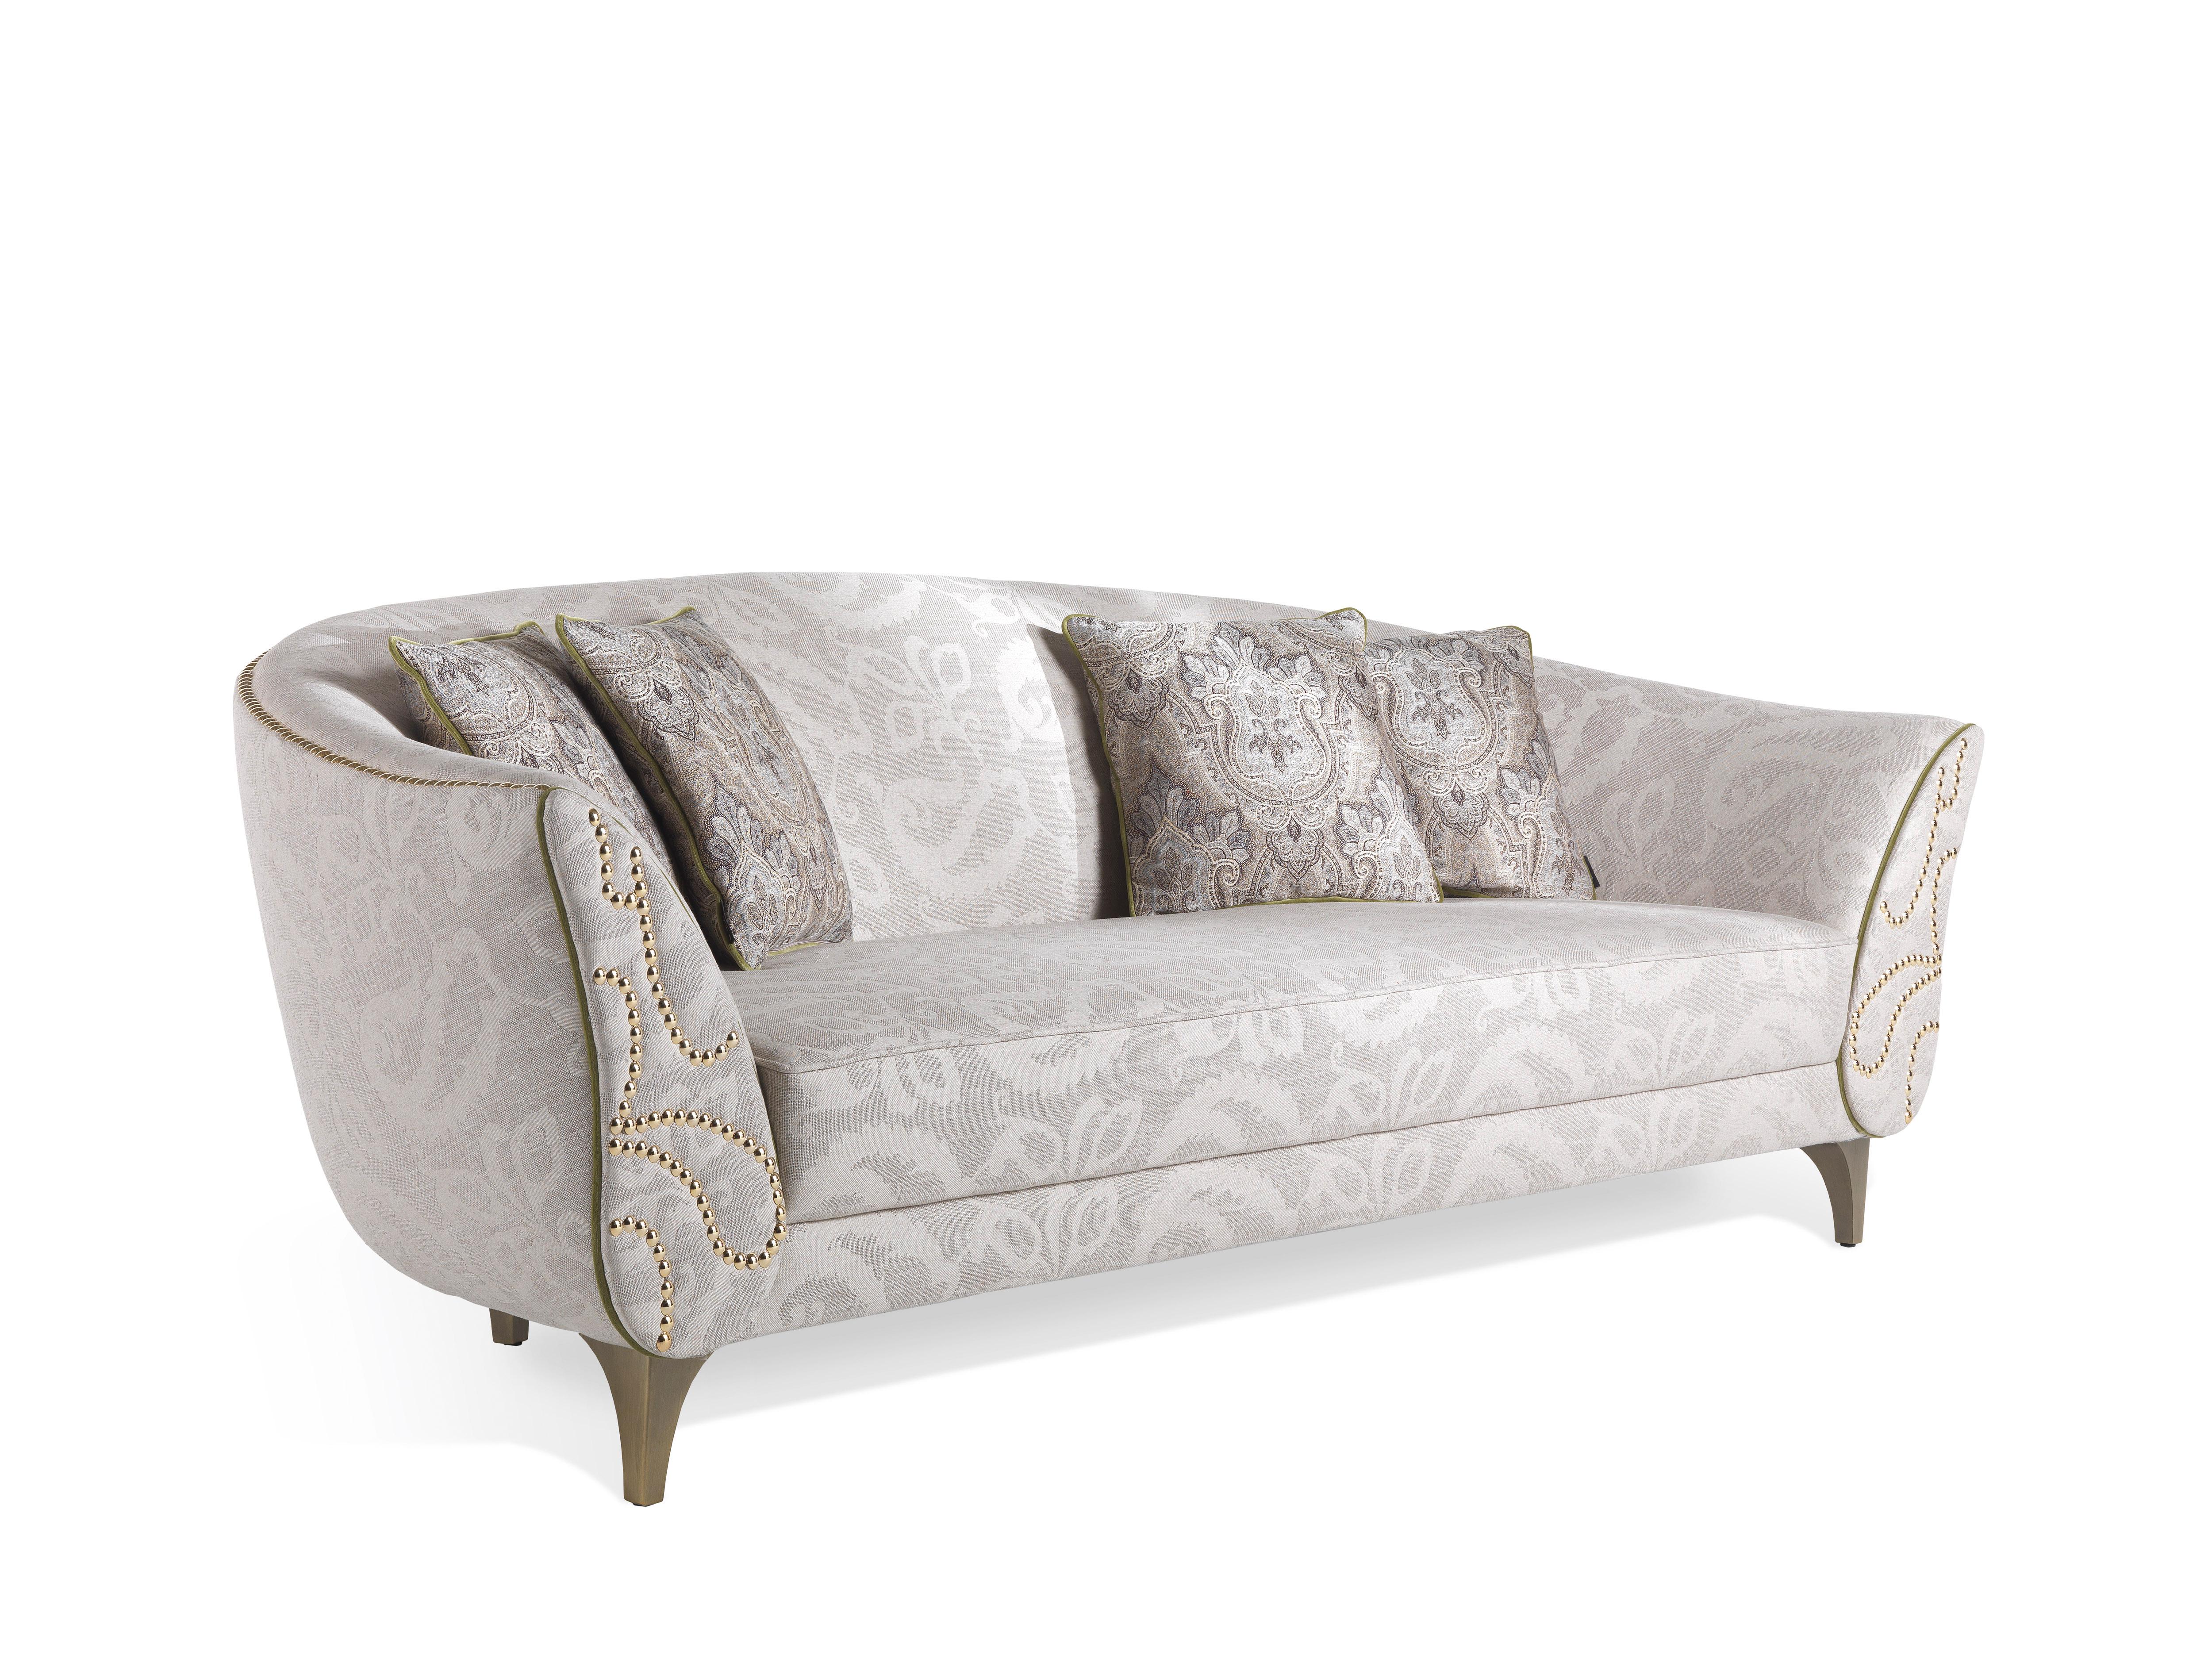 Classic charm meets oriental and spiritual suggestions in a refined and elegant sofa. The references to the Asiatic, mystical culture are declined in the use of gold and light tone sur tone nuances, revealing the introspective character of the